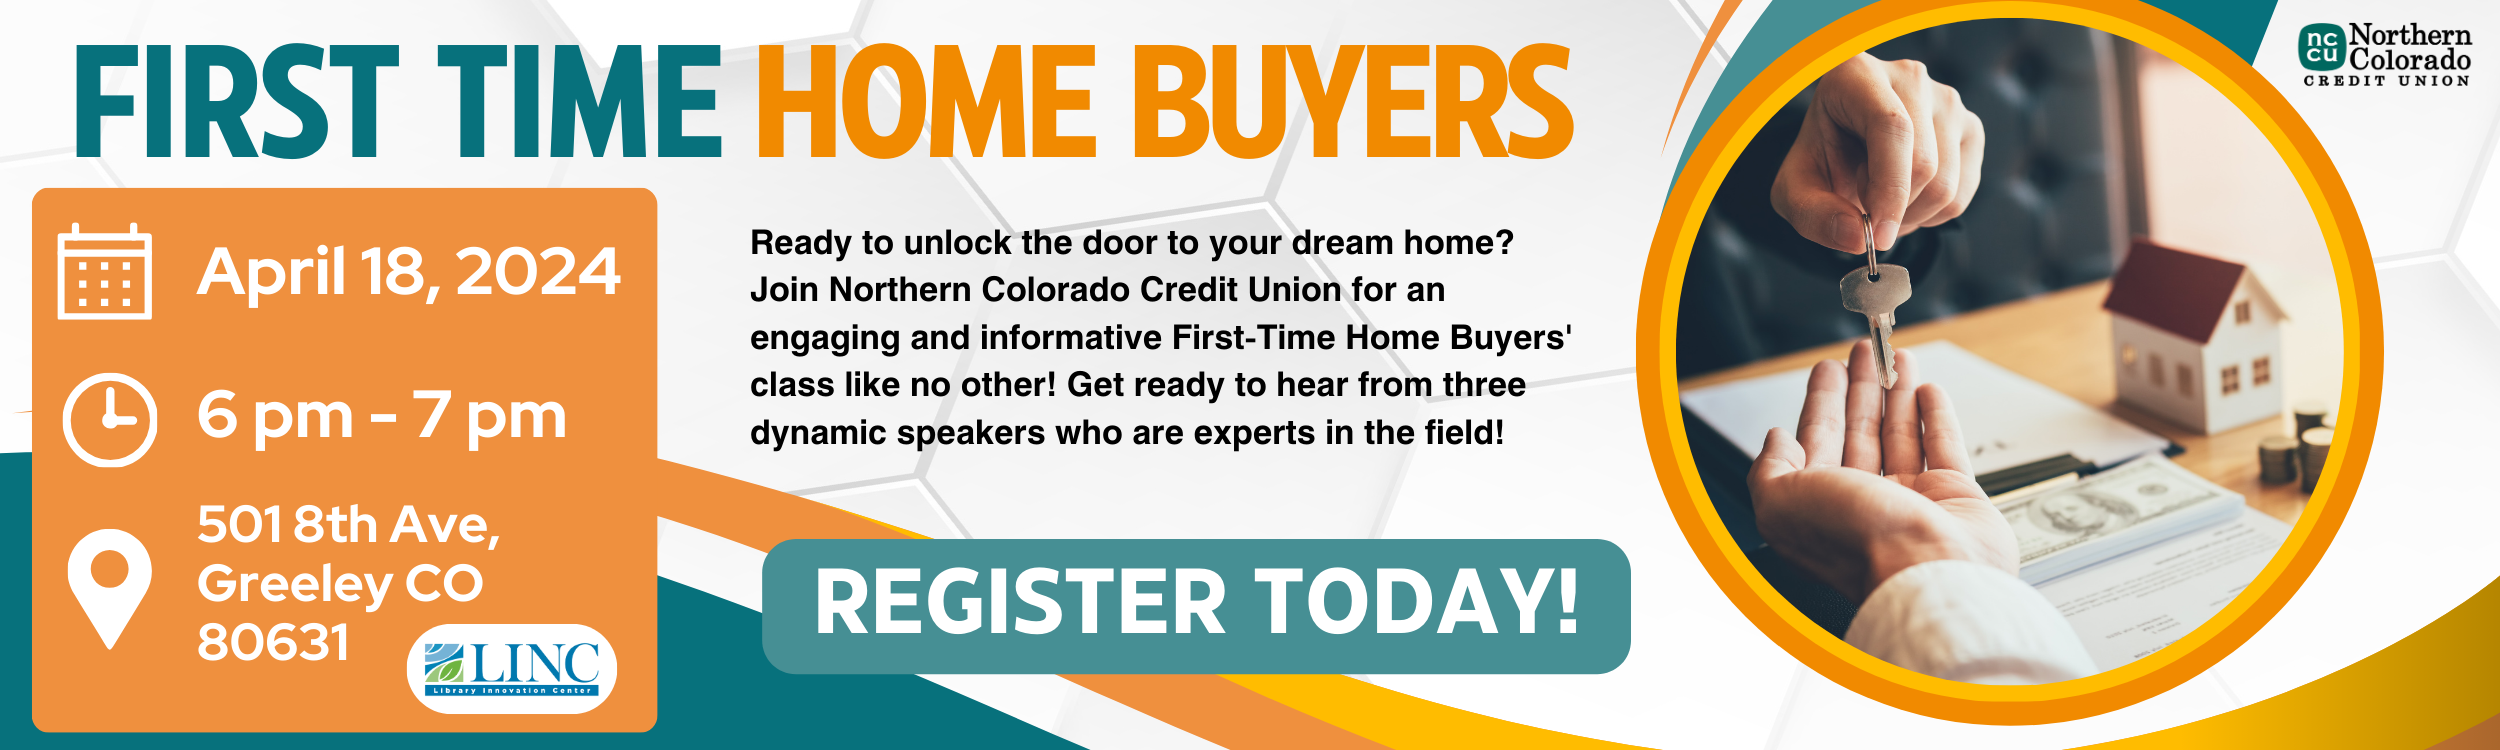 First time home buyers class